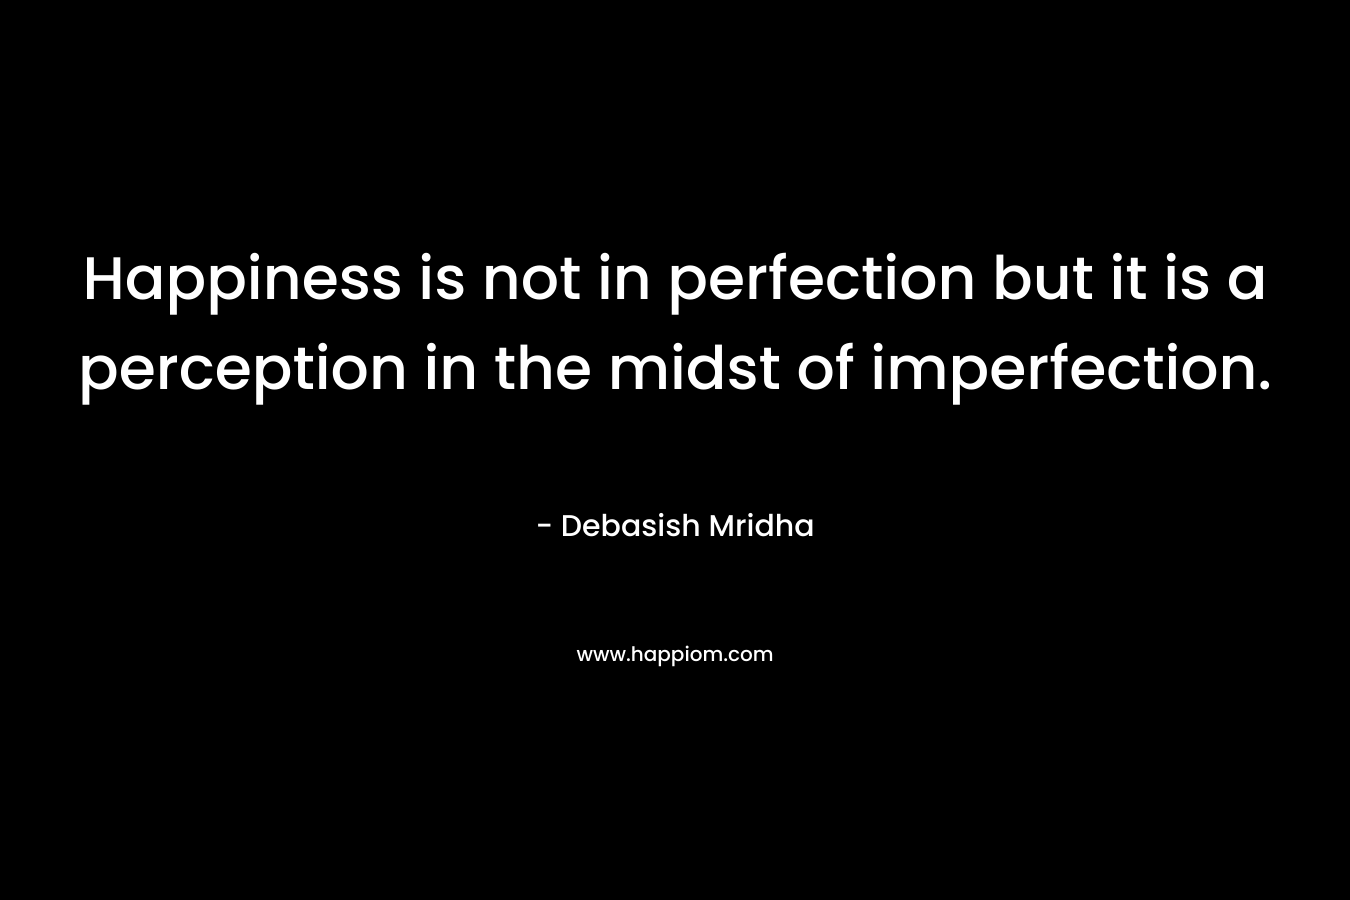 Happiness is not in perfection but it is a perception in the midst of imperfection.